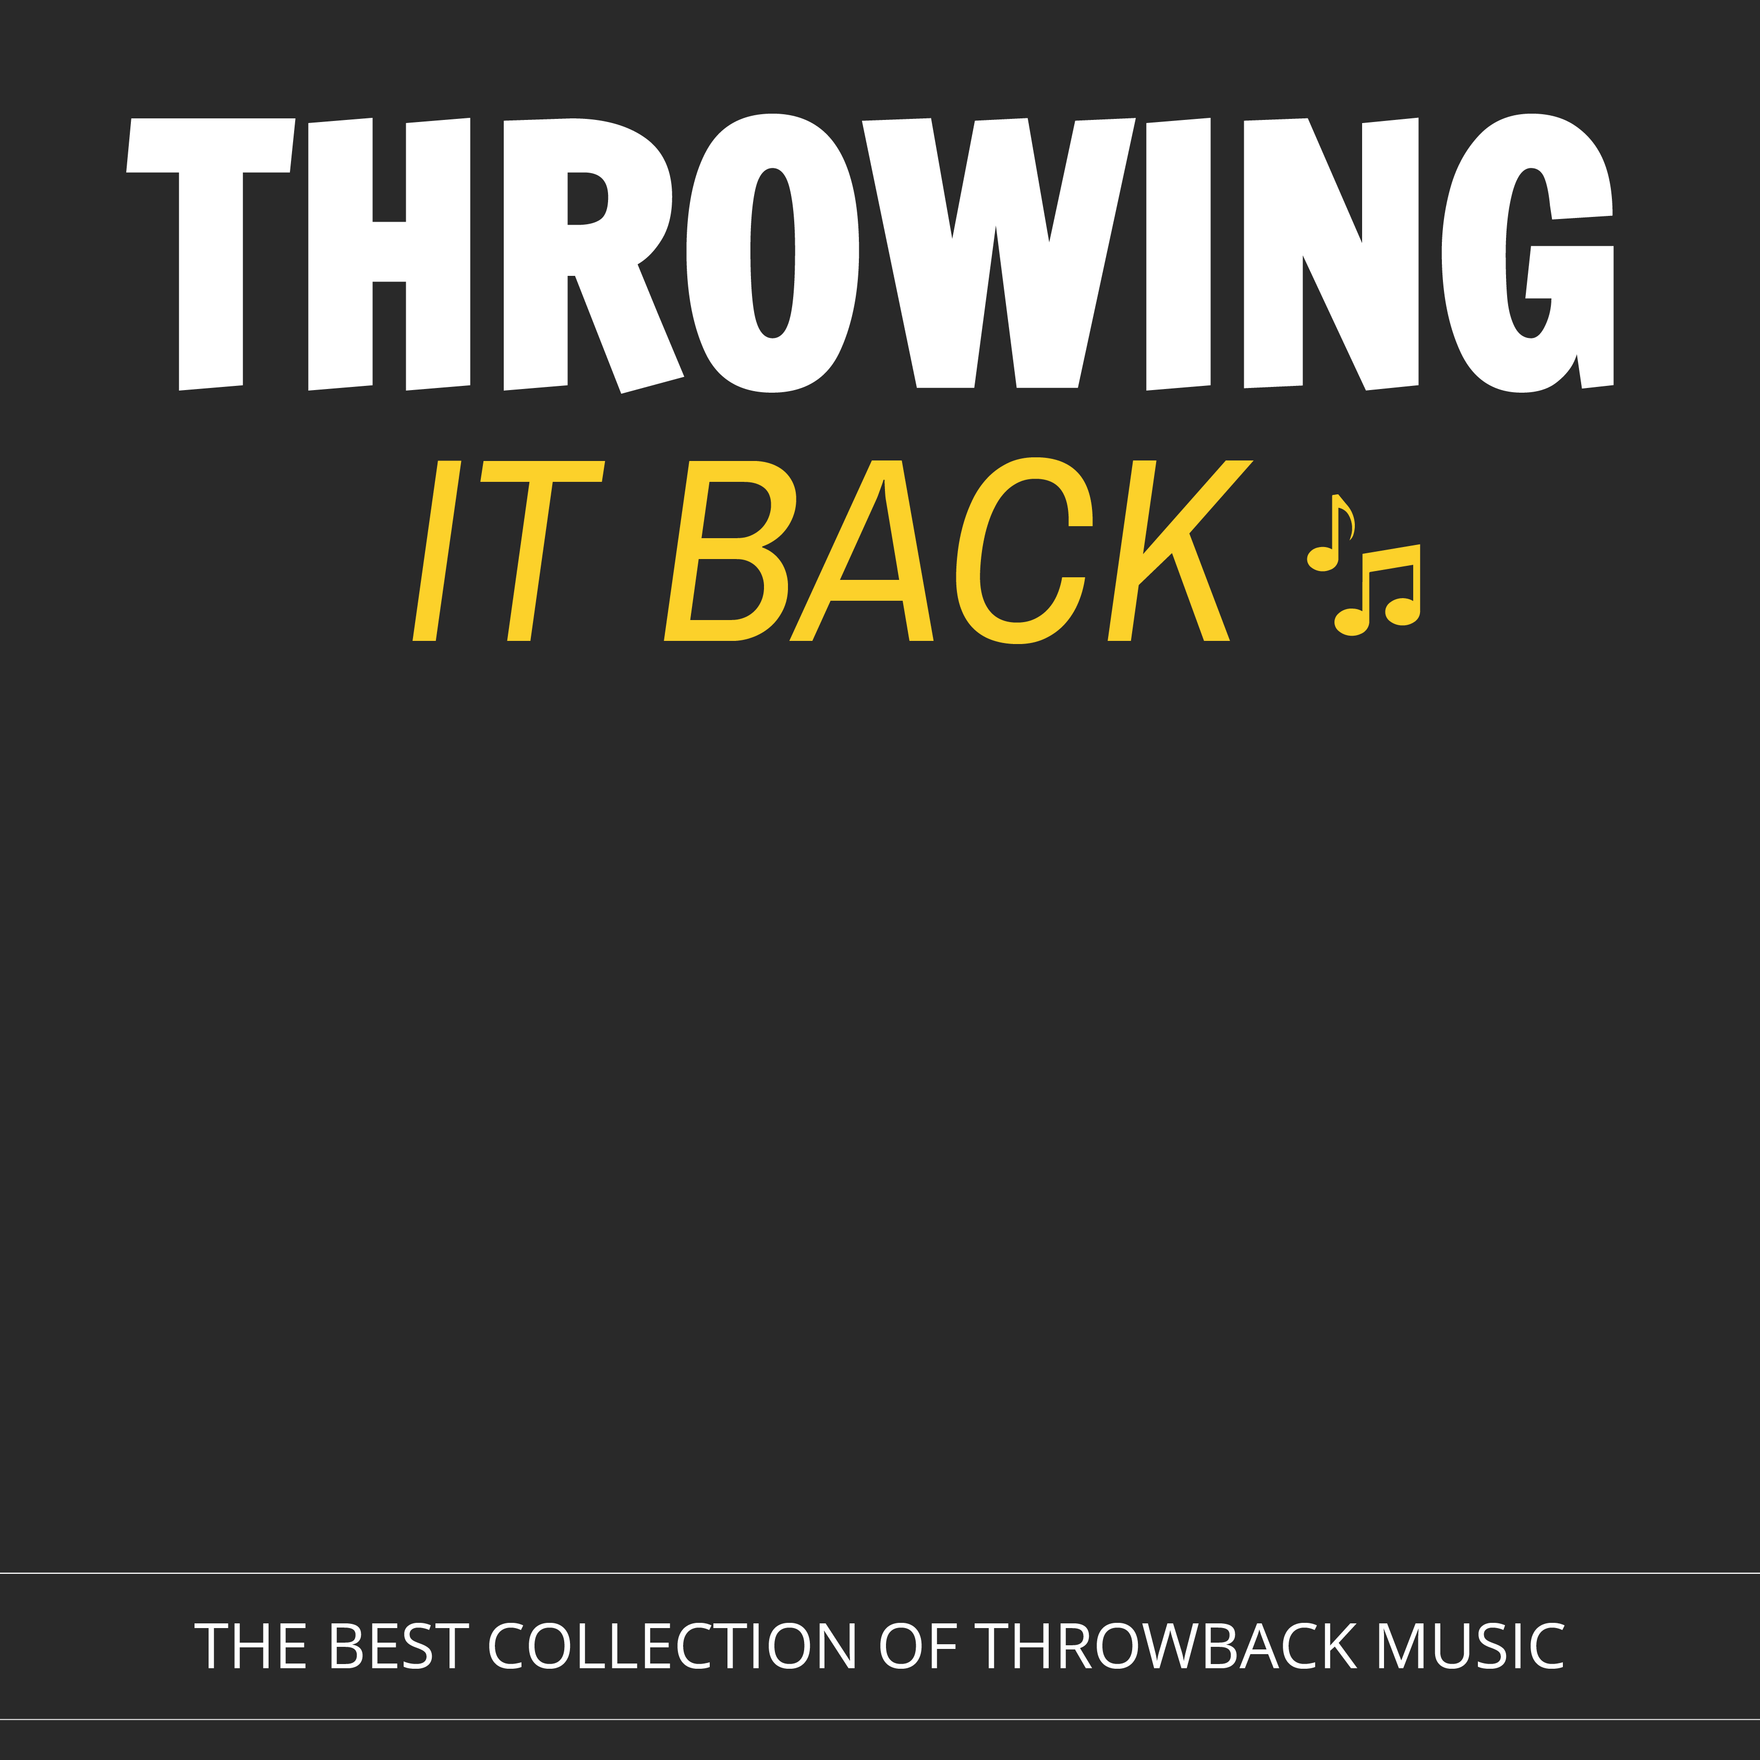 Throwback Playlist Cover Template